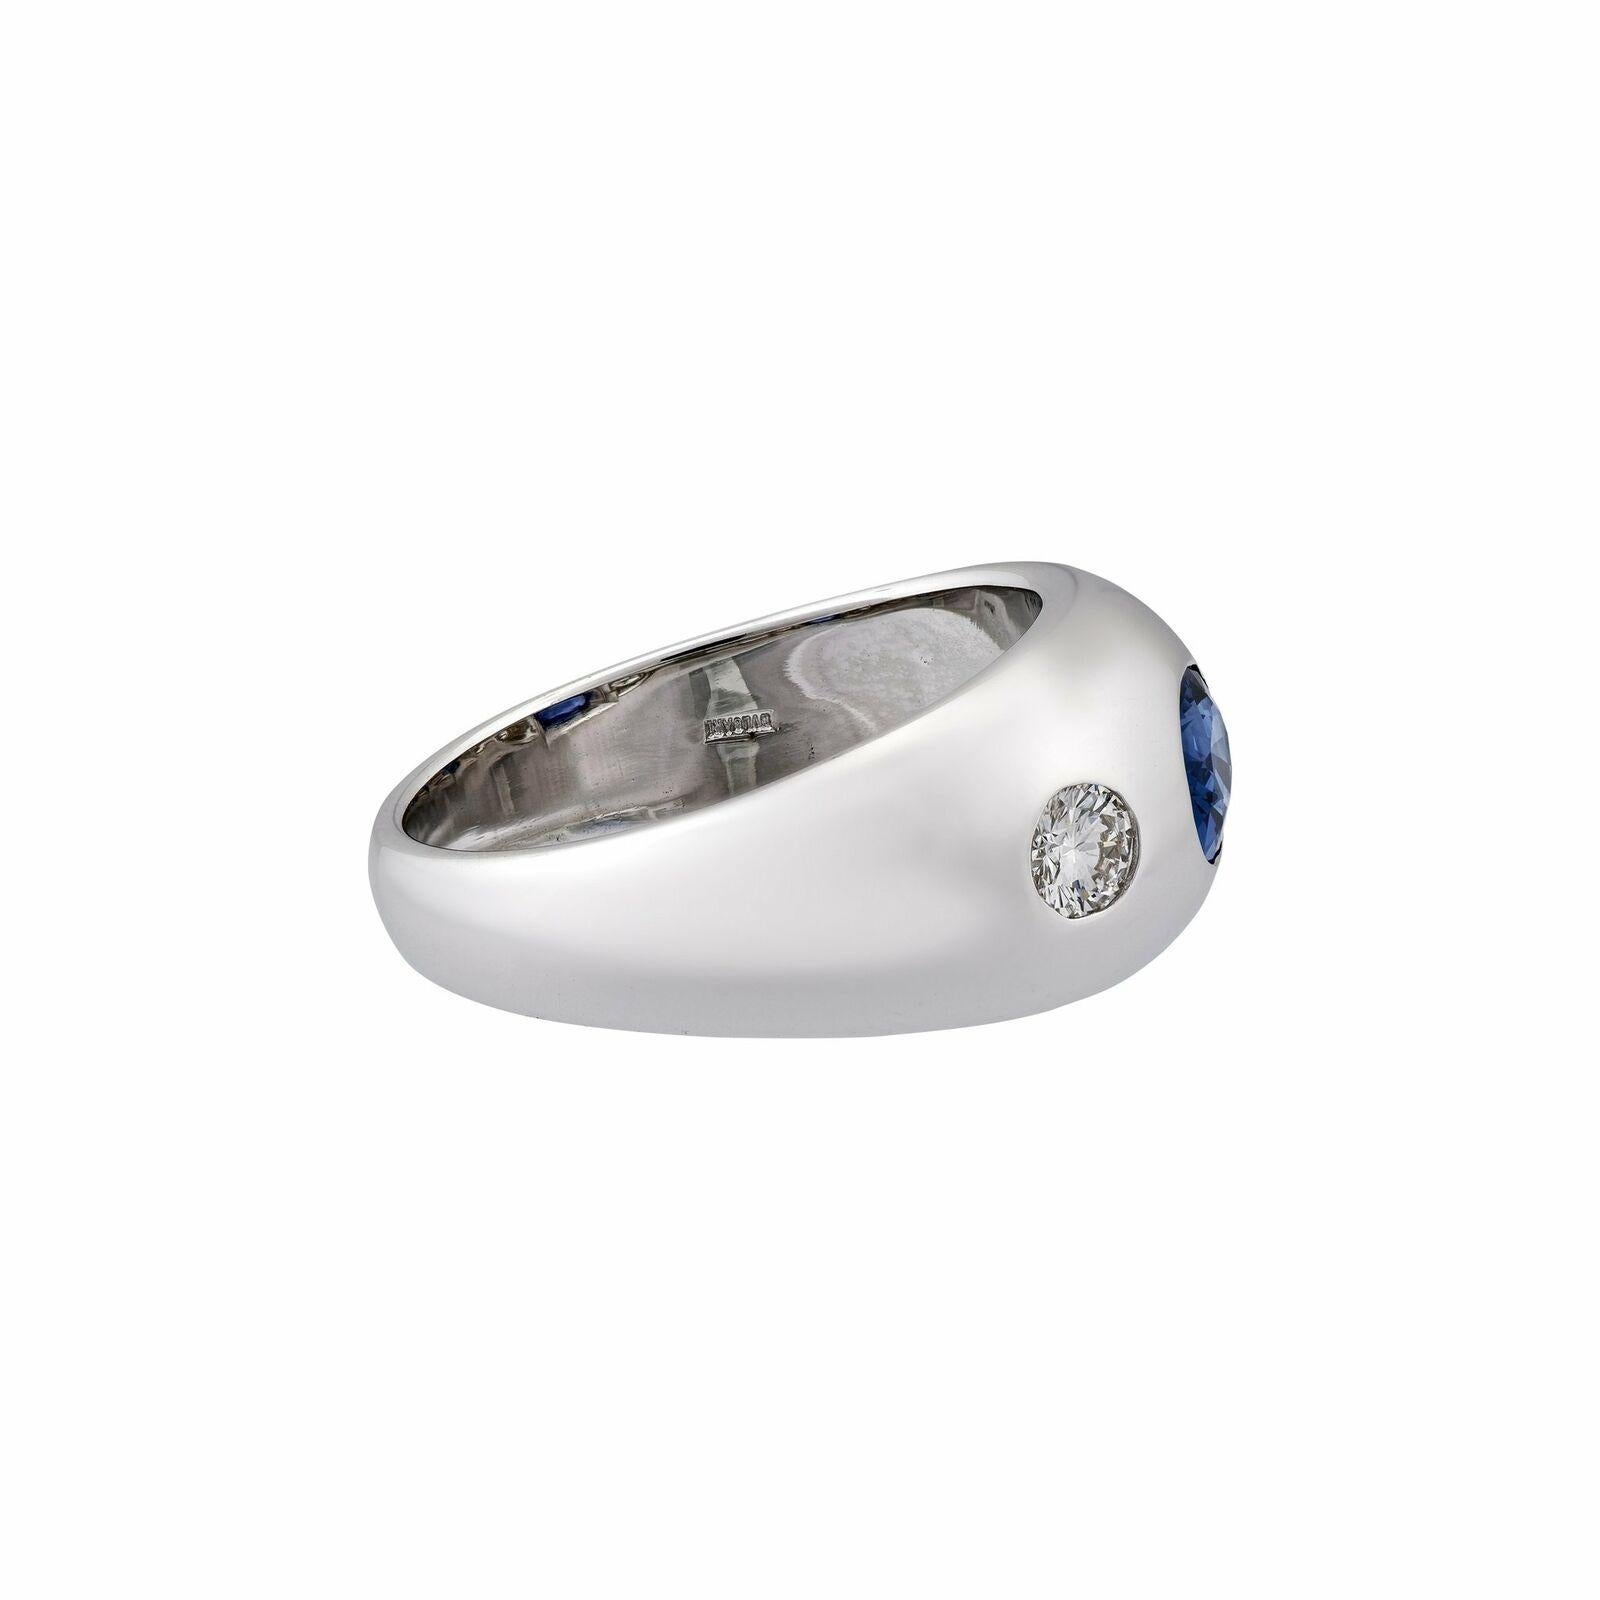 Bvlgari Italy 18k White Gold, Diamond & Sapphire Three Stone Gypsy Ring Vintage

Here is your chance to purchase a beautiful and highly collectible designer ring.  Truly a great piece at a great price! 

The weight is 8.84 grams.  The ring size is